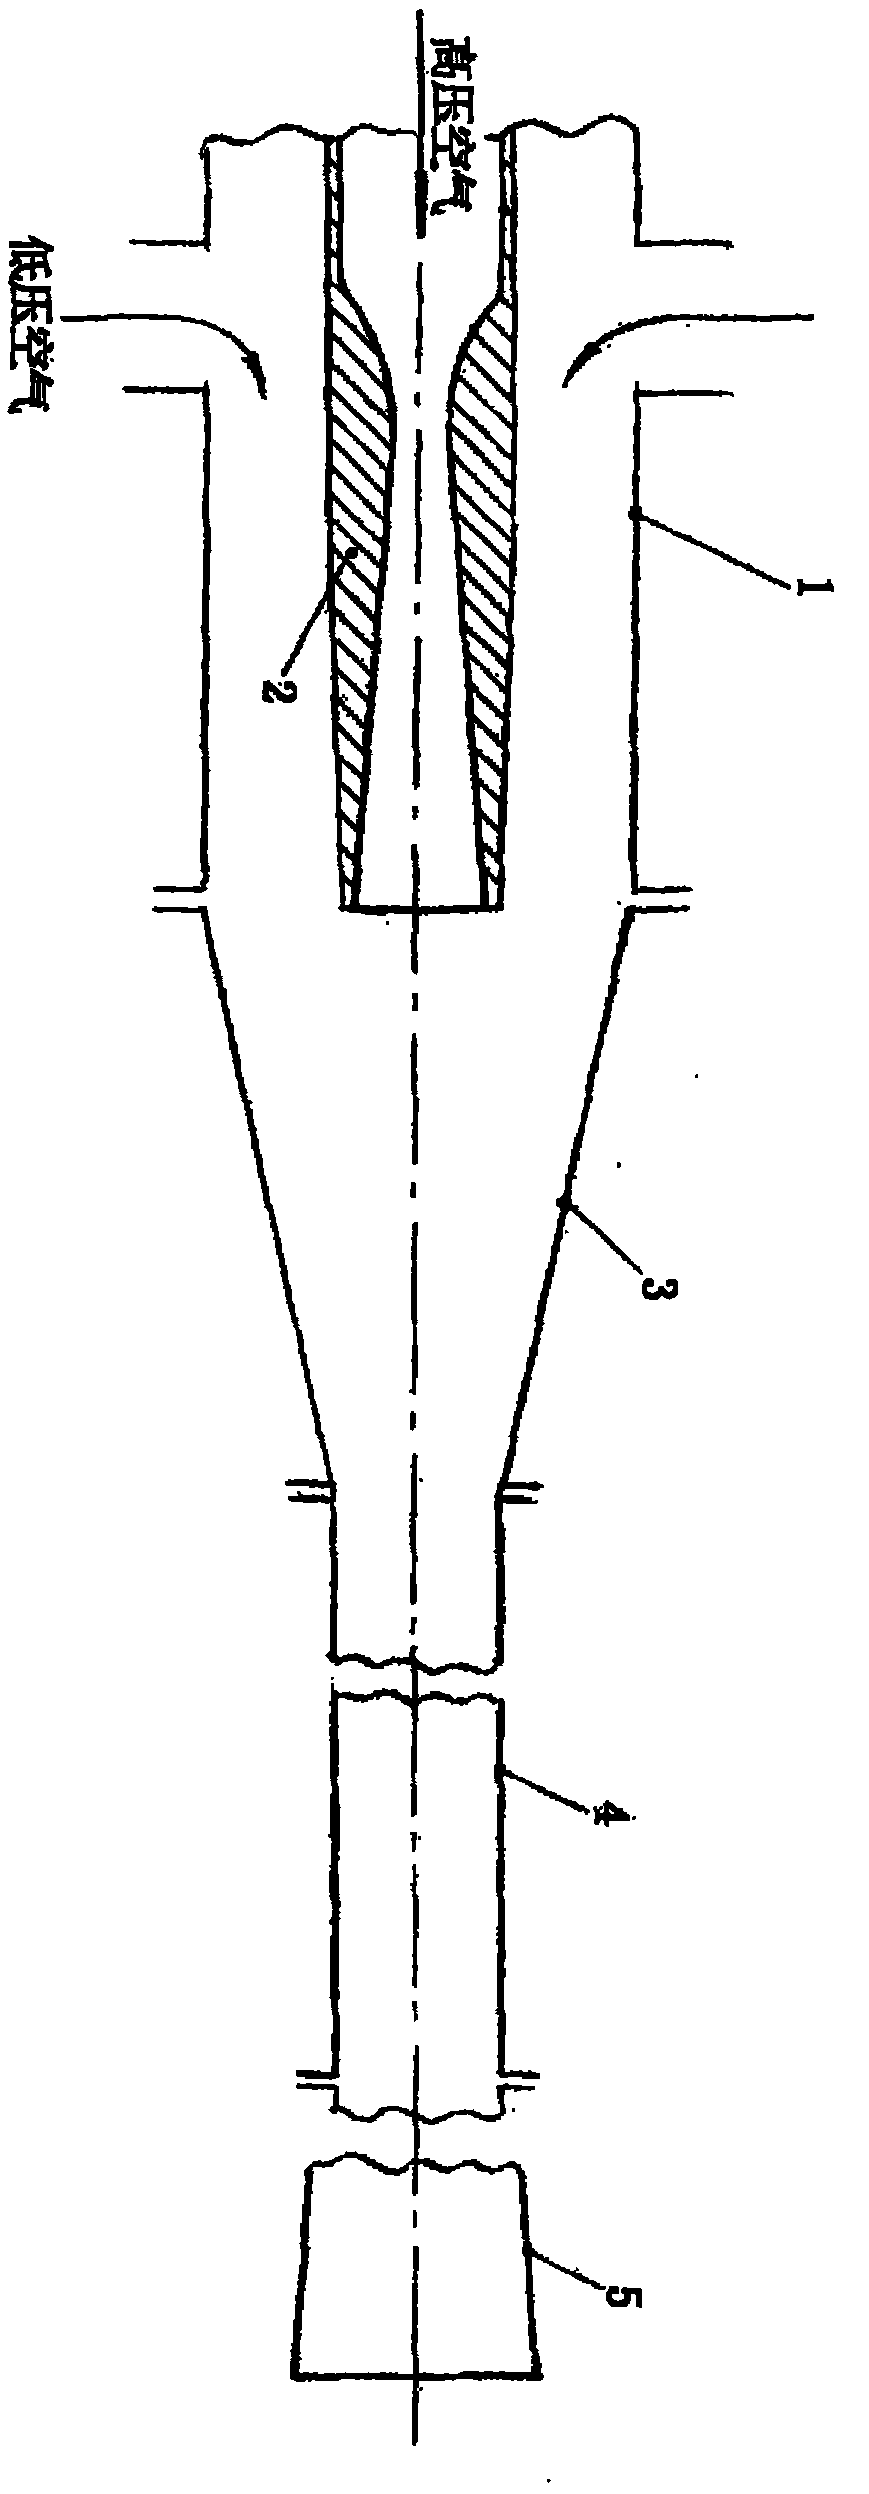 Injection/drainage air-supply turbocharging system